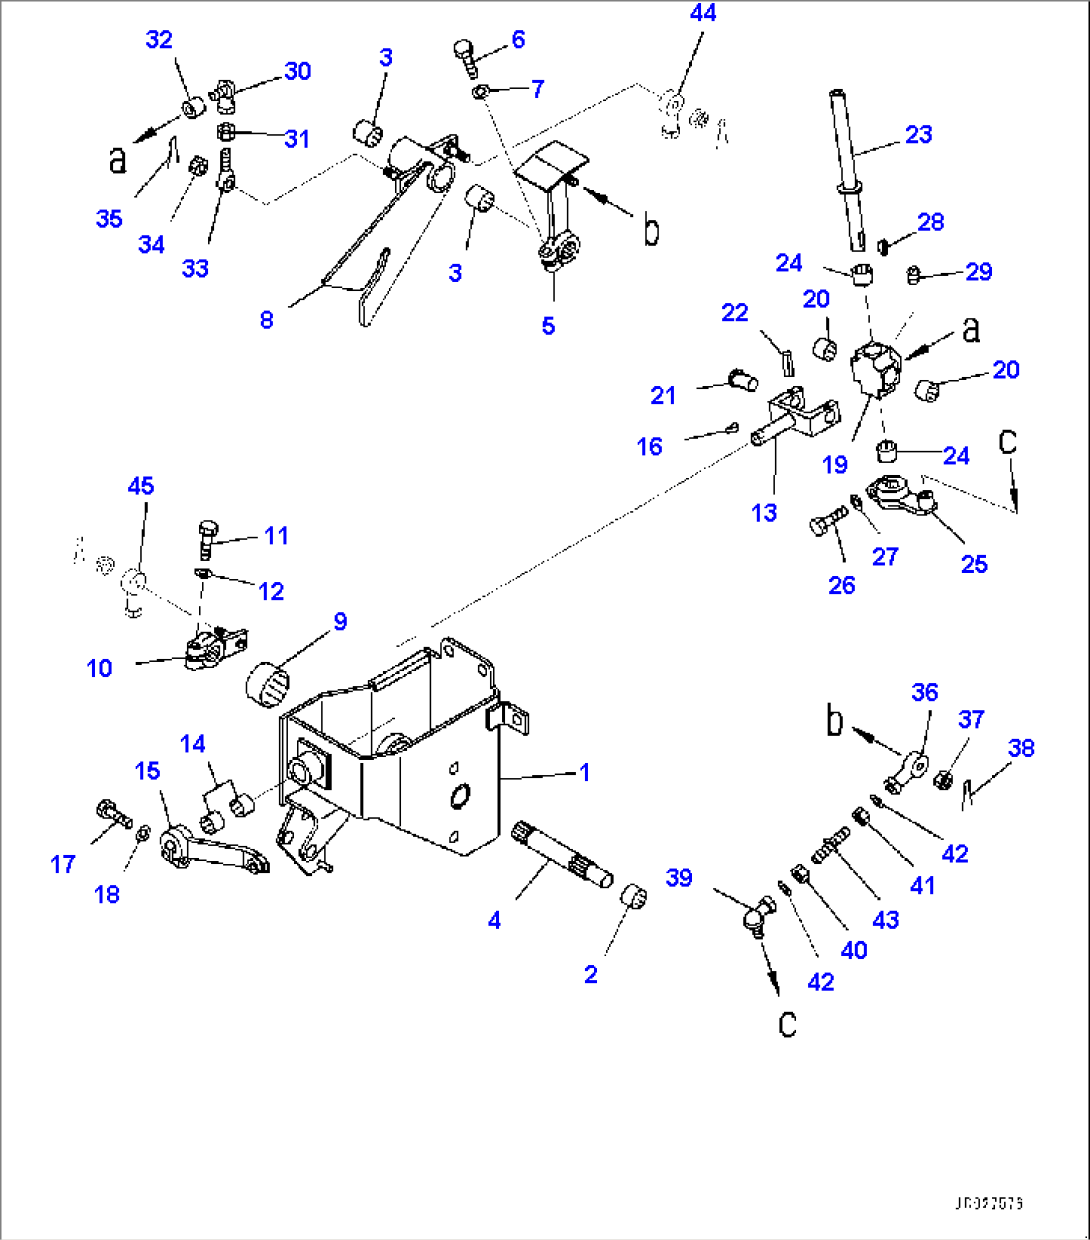 Fuel Tank and Controls, Steering, Gear Shift Lever (#90210-)